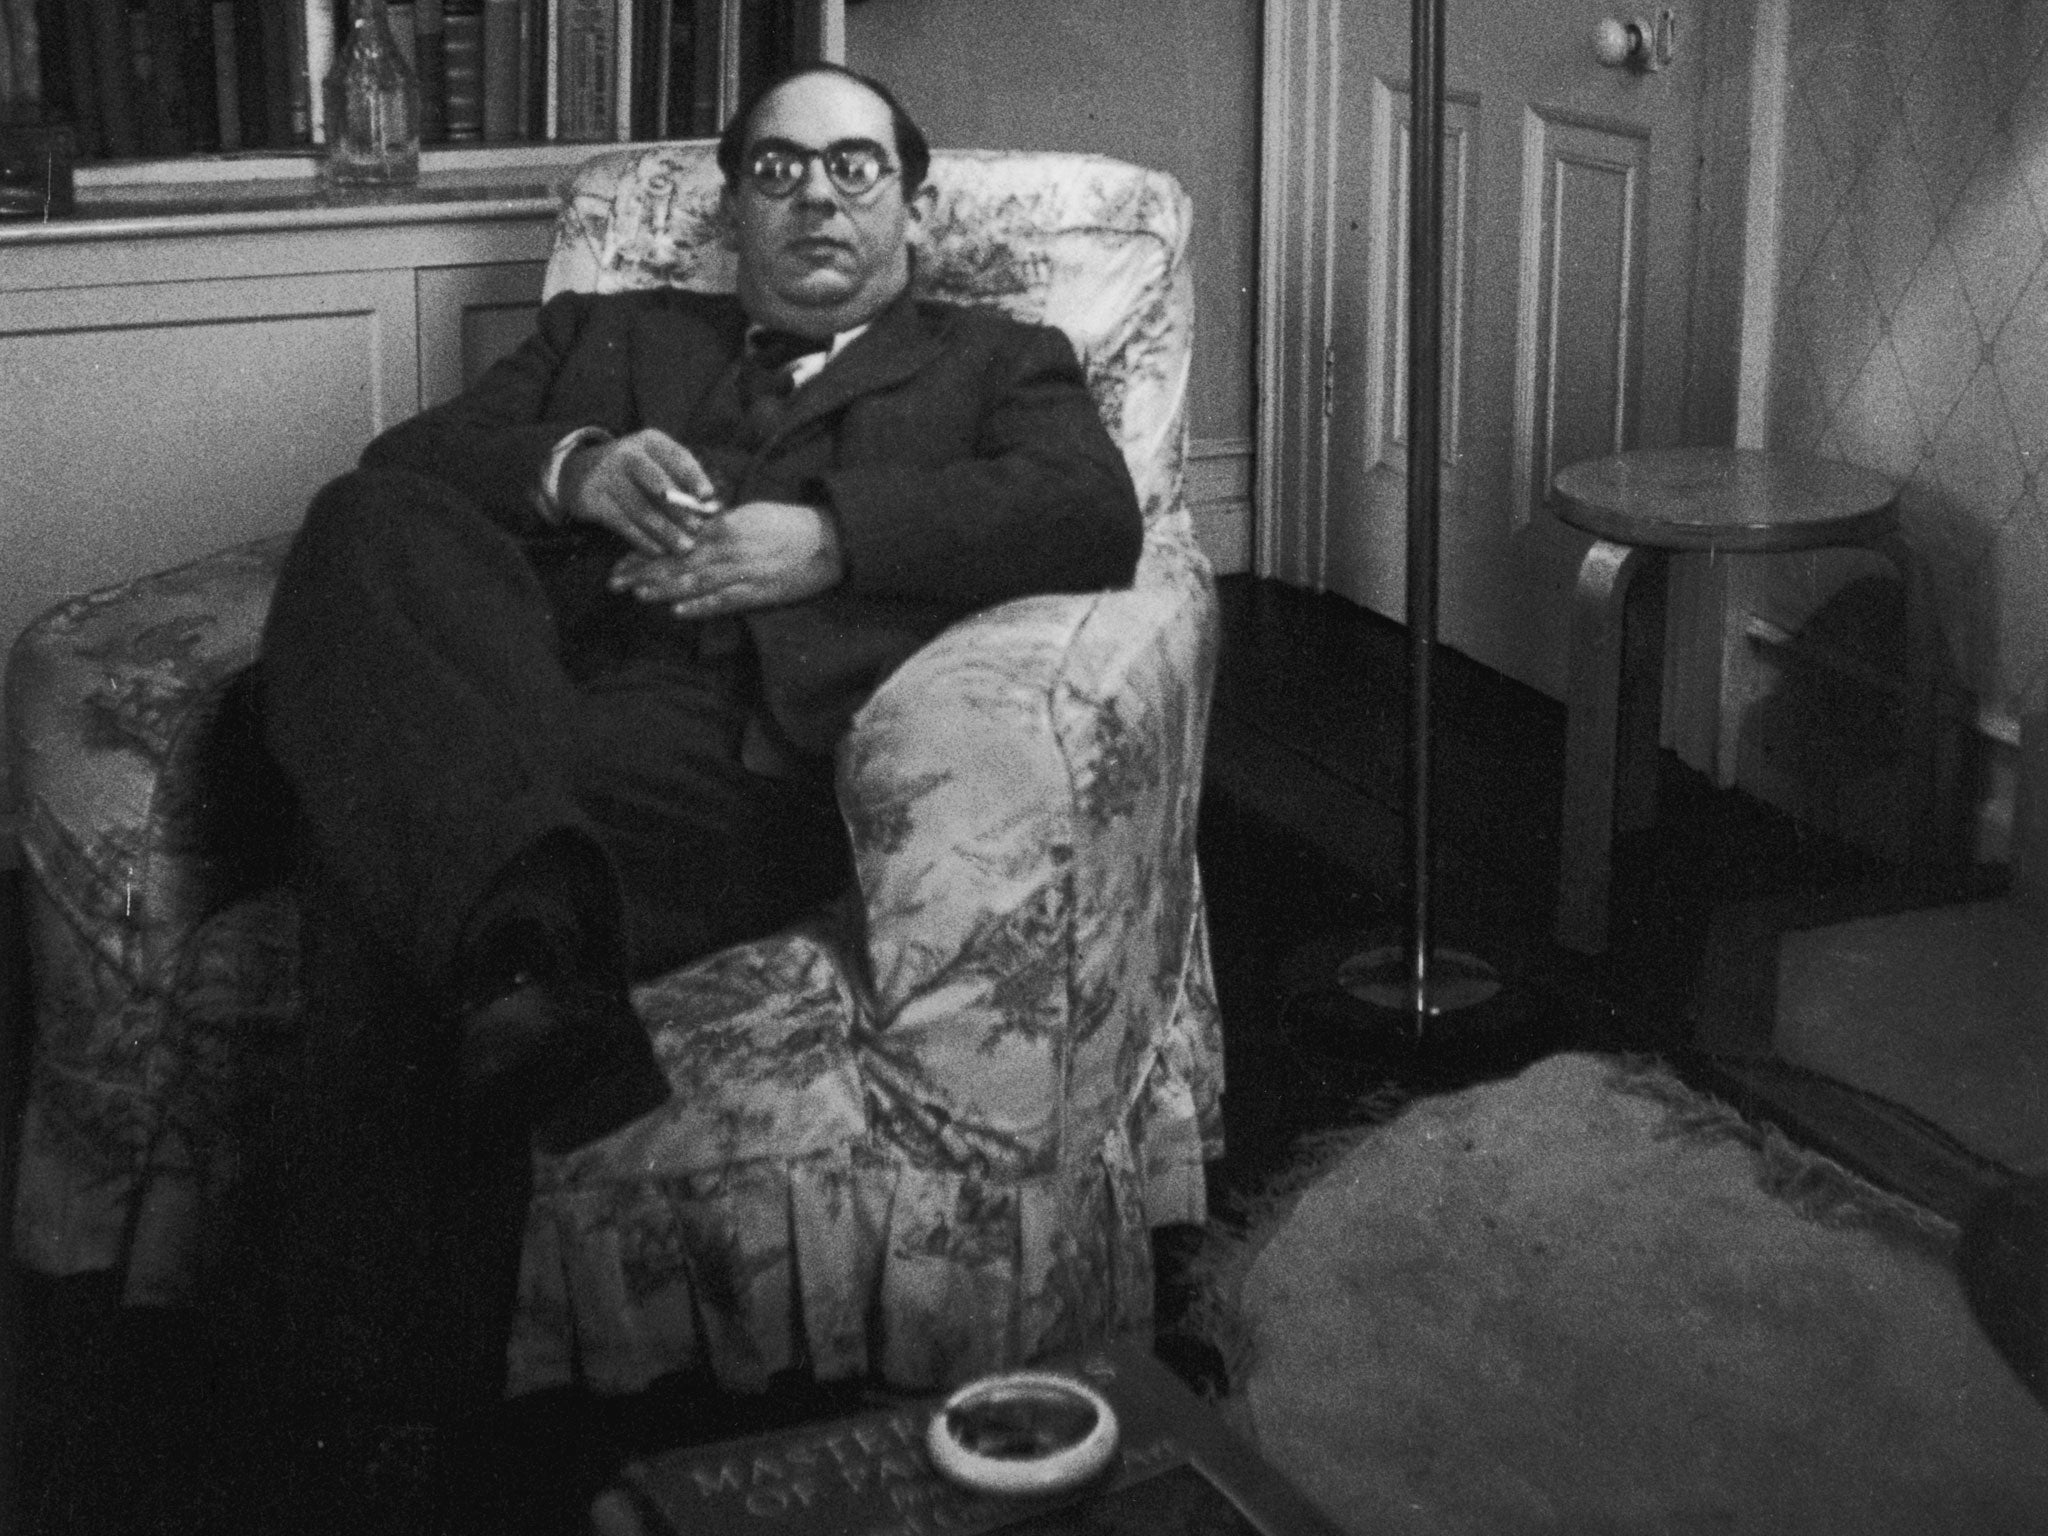 A man alone: Isaiah Berlin’s letters remind us how an academic can intervene on a wider cultural stage